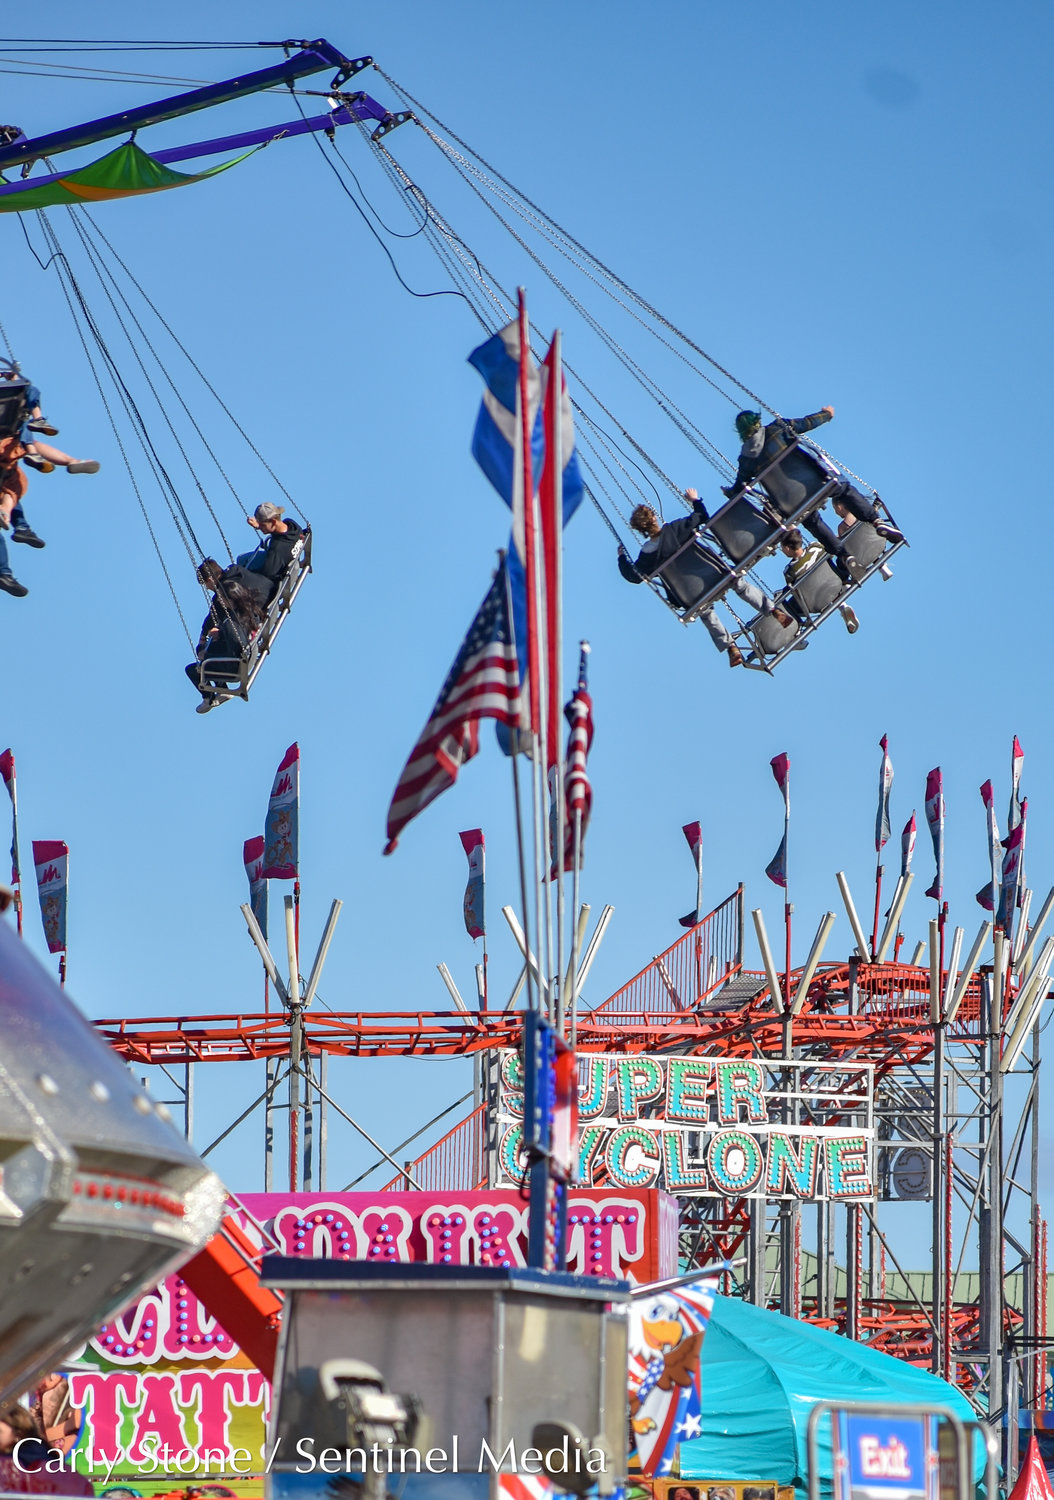 These swings offer a cool breeze and a bit of a thrill from so high up at the state fair.